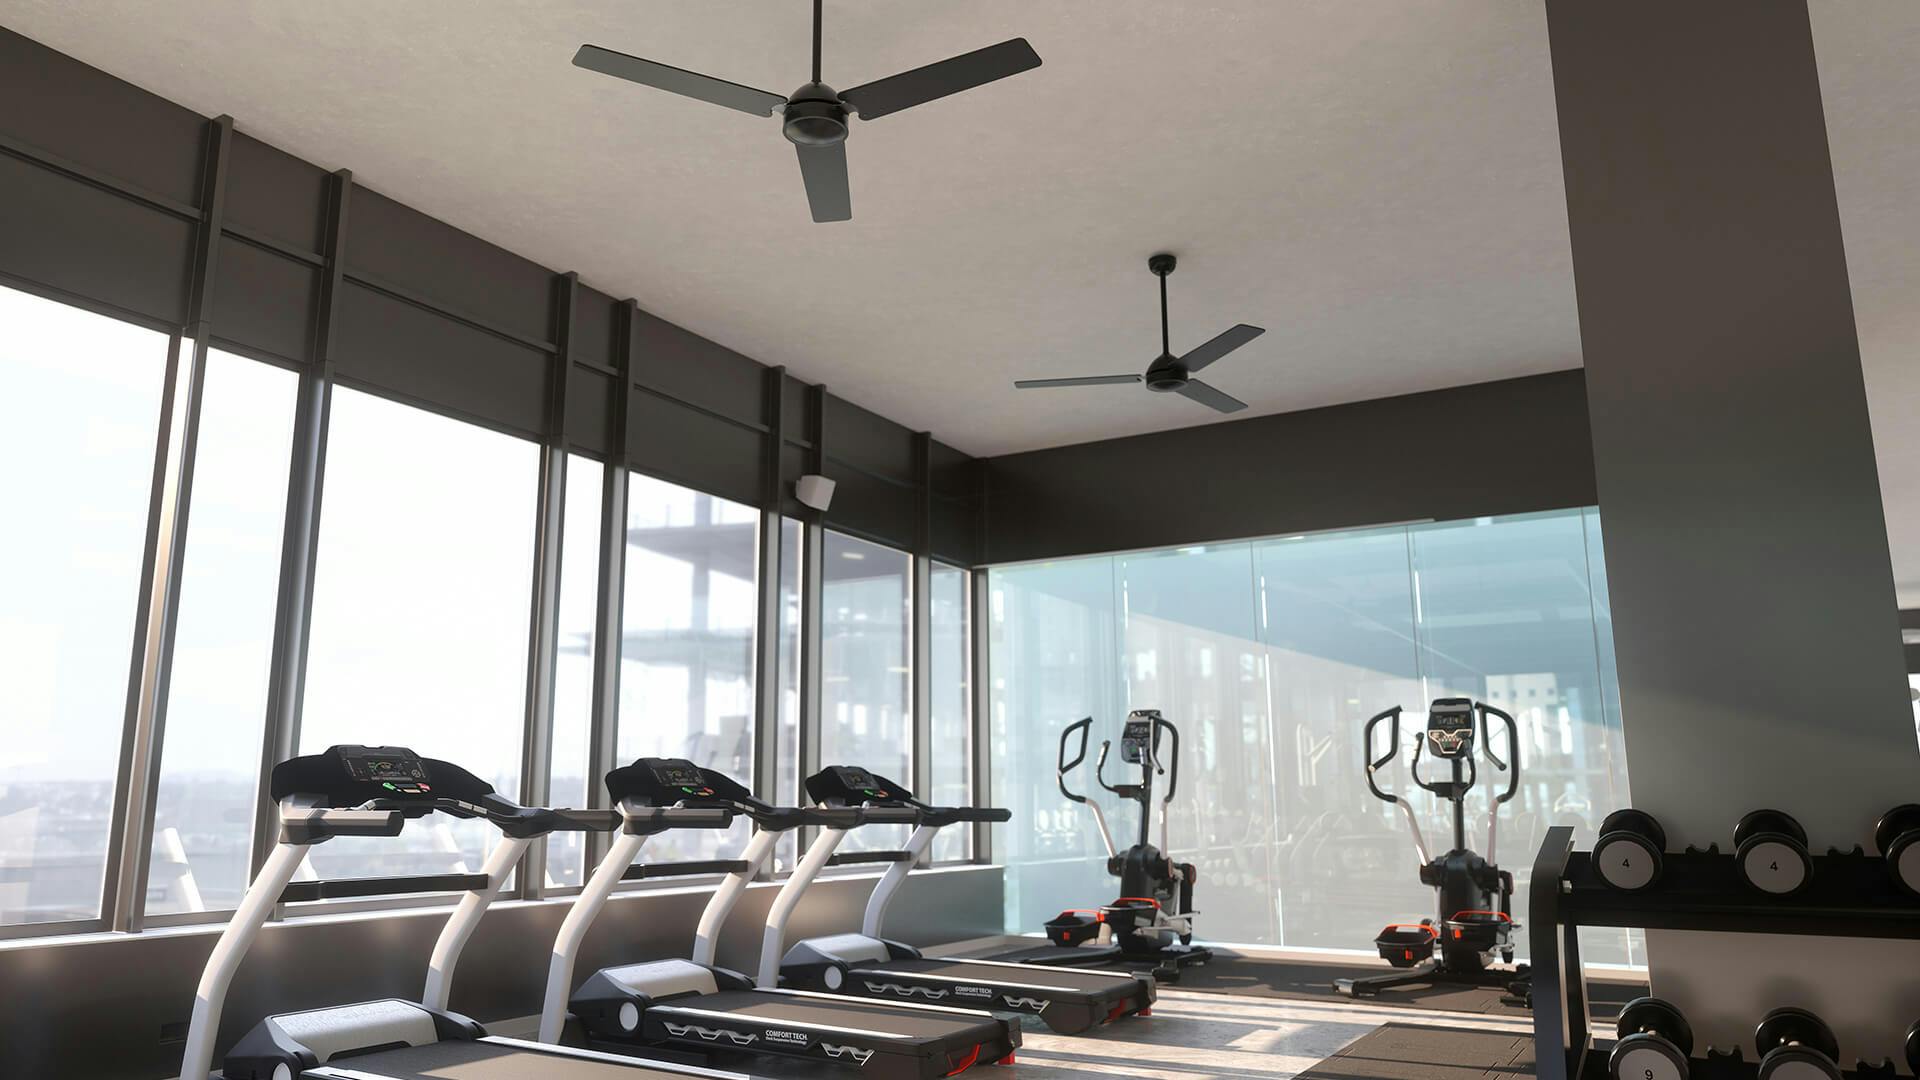 Hotel gym on a higher up floor in a city, featuring ceiling fans